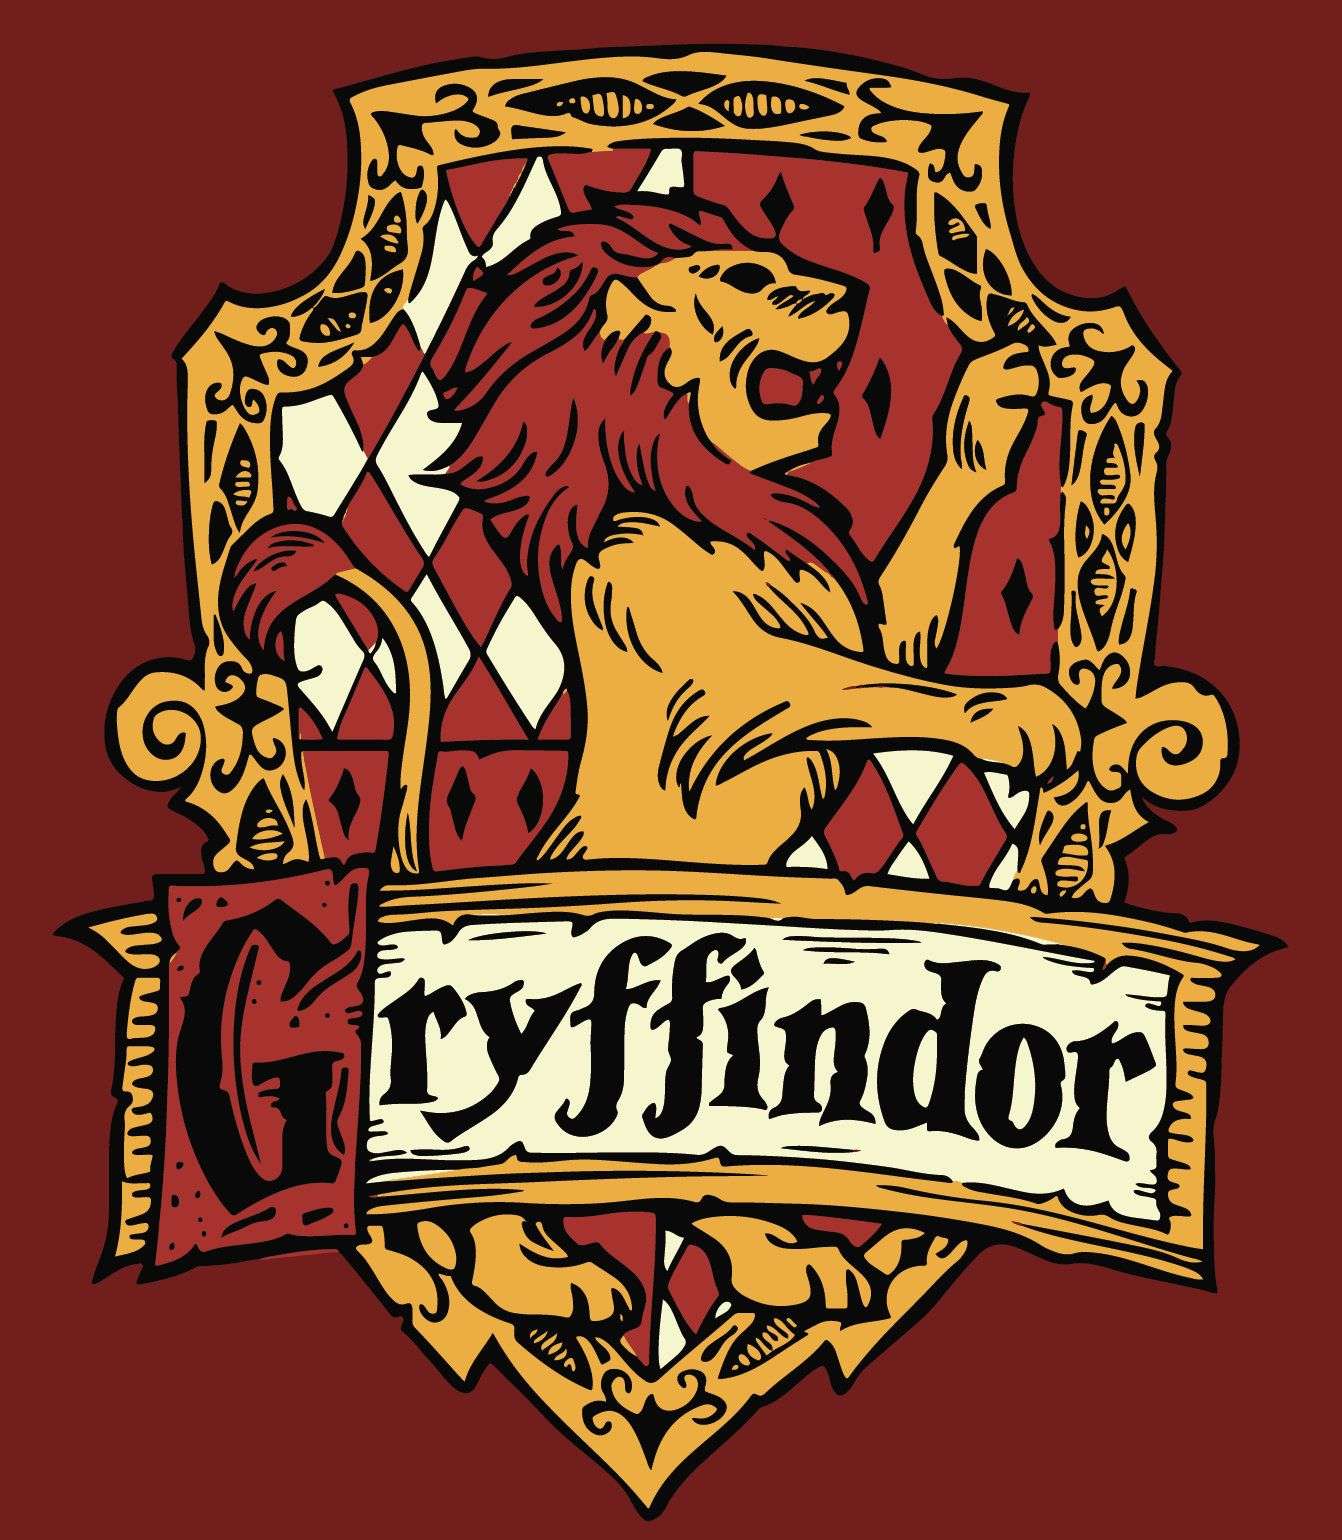 Hogwarts house VECTOR DOWNLOADS High quality versions of ...